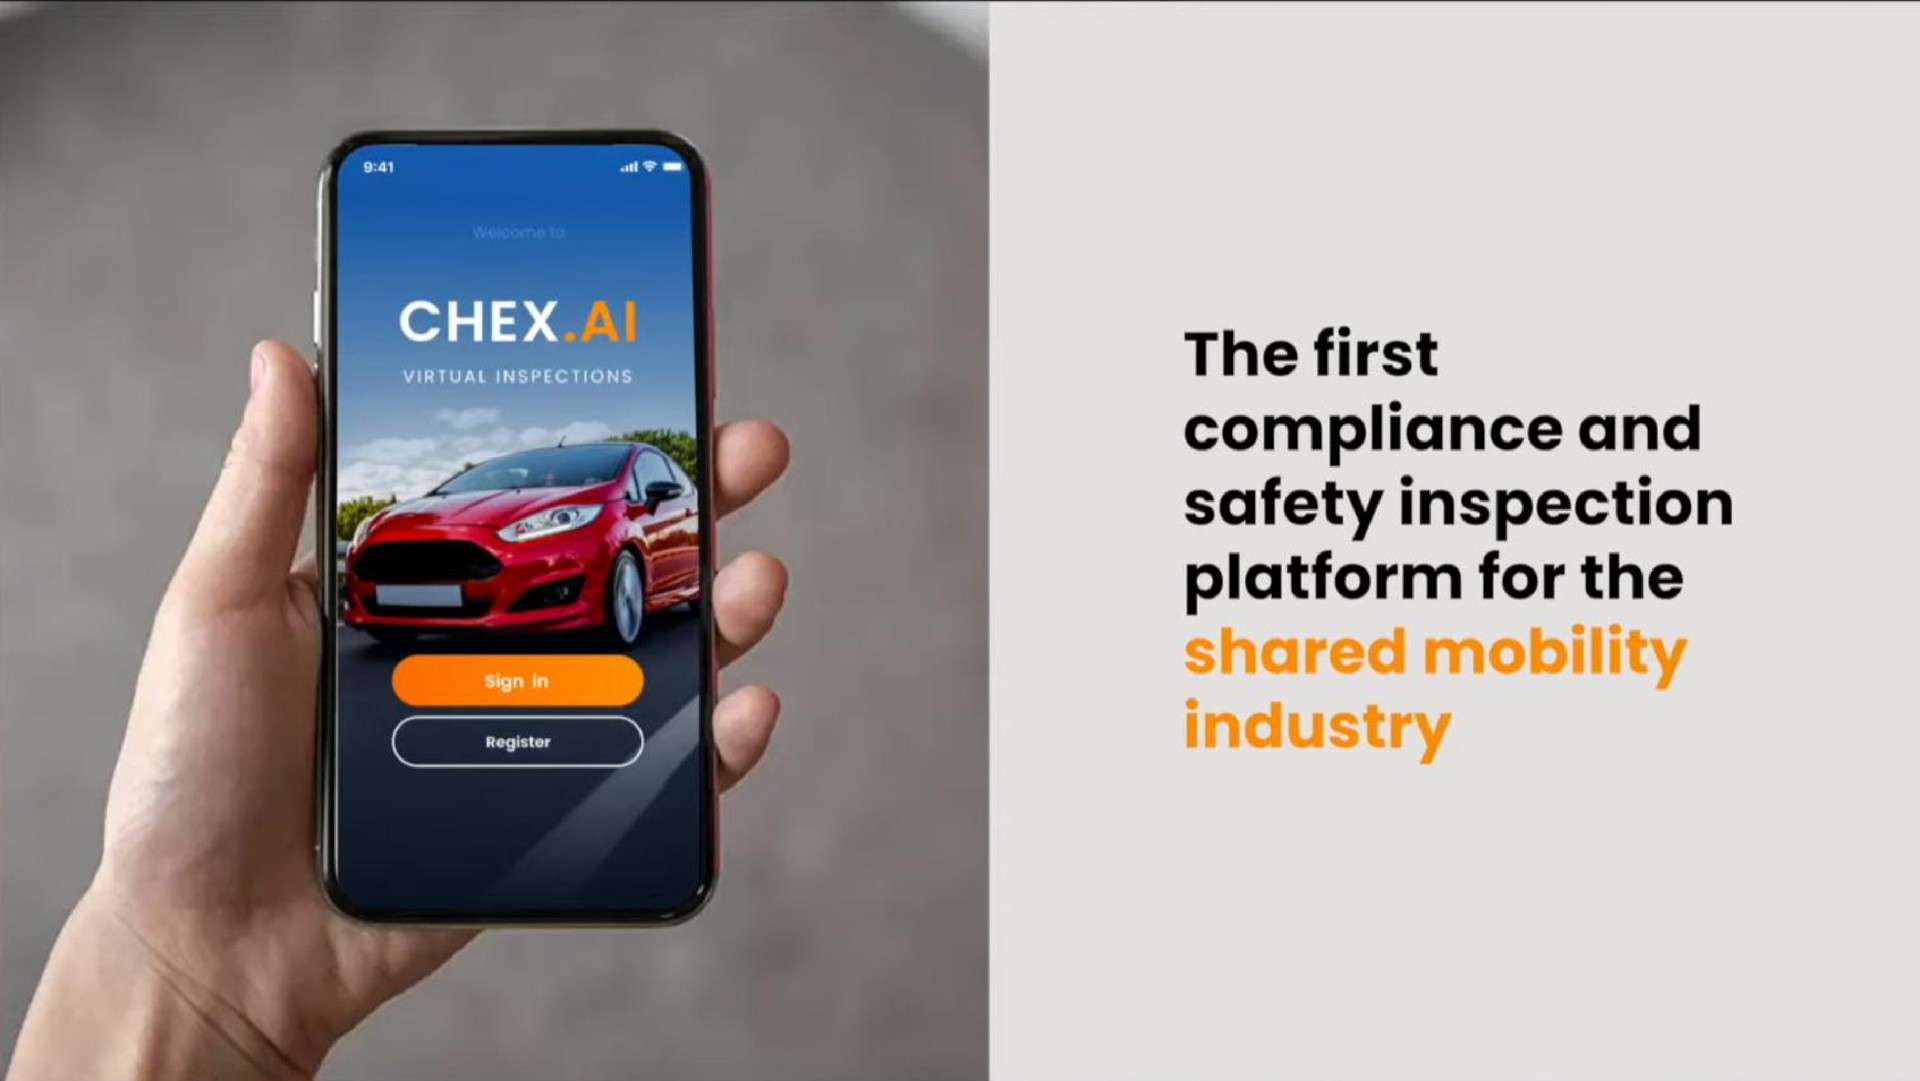 industry the first compliance and safety inspection platform for the shared mobility | Chex.ai